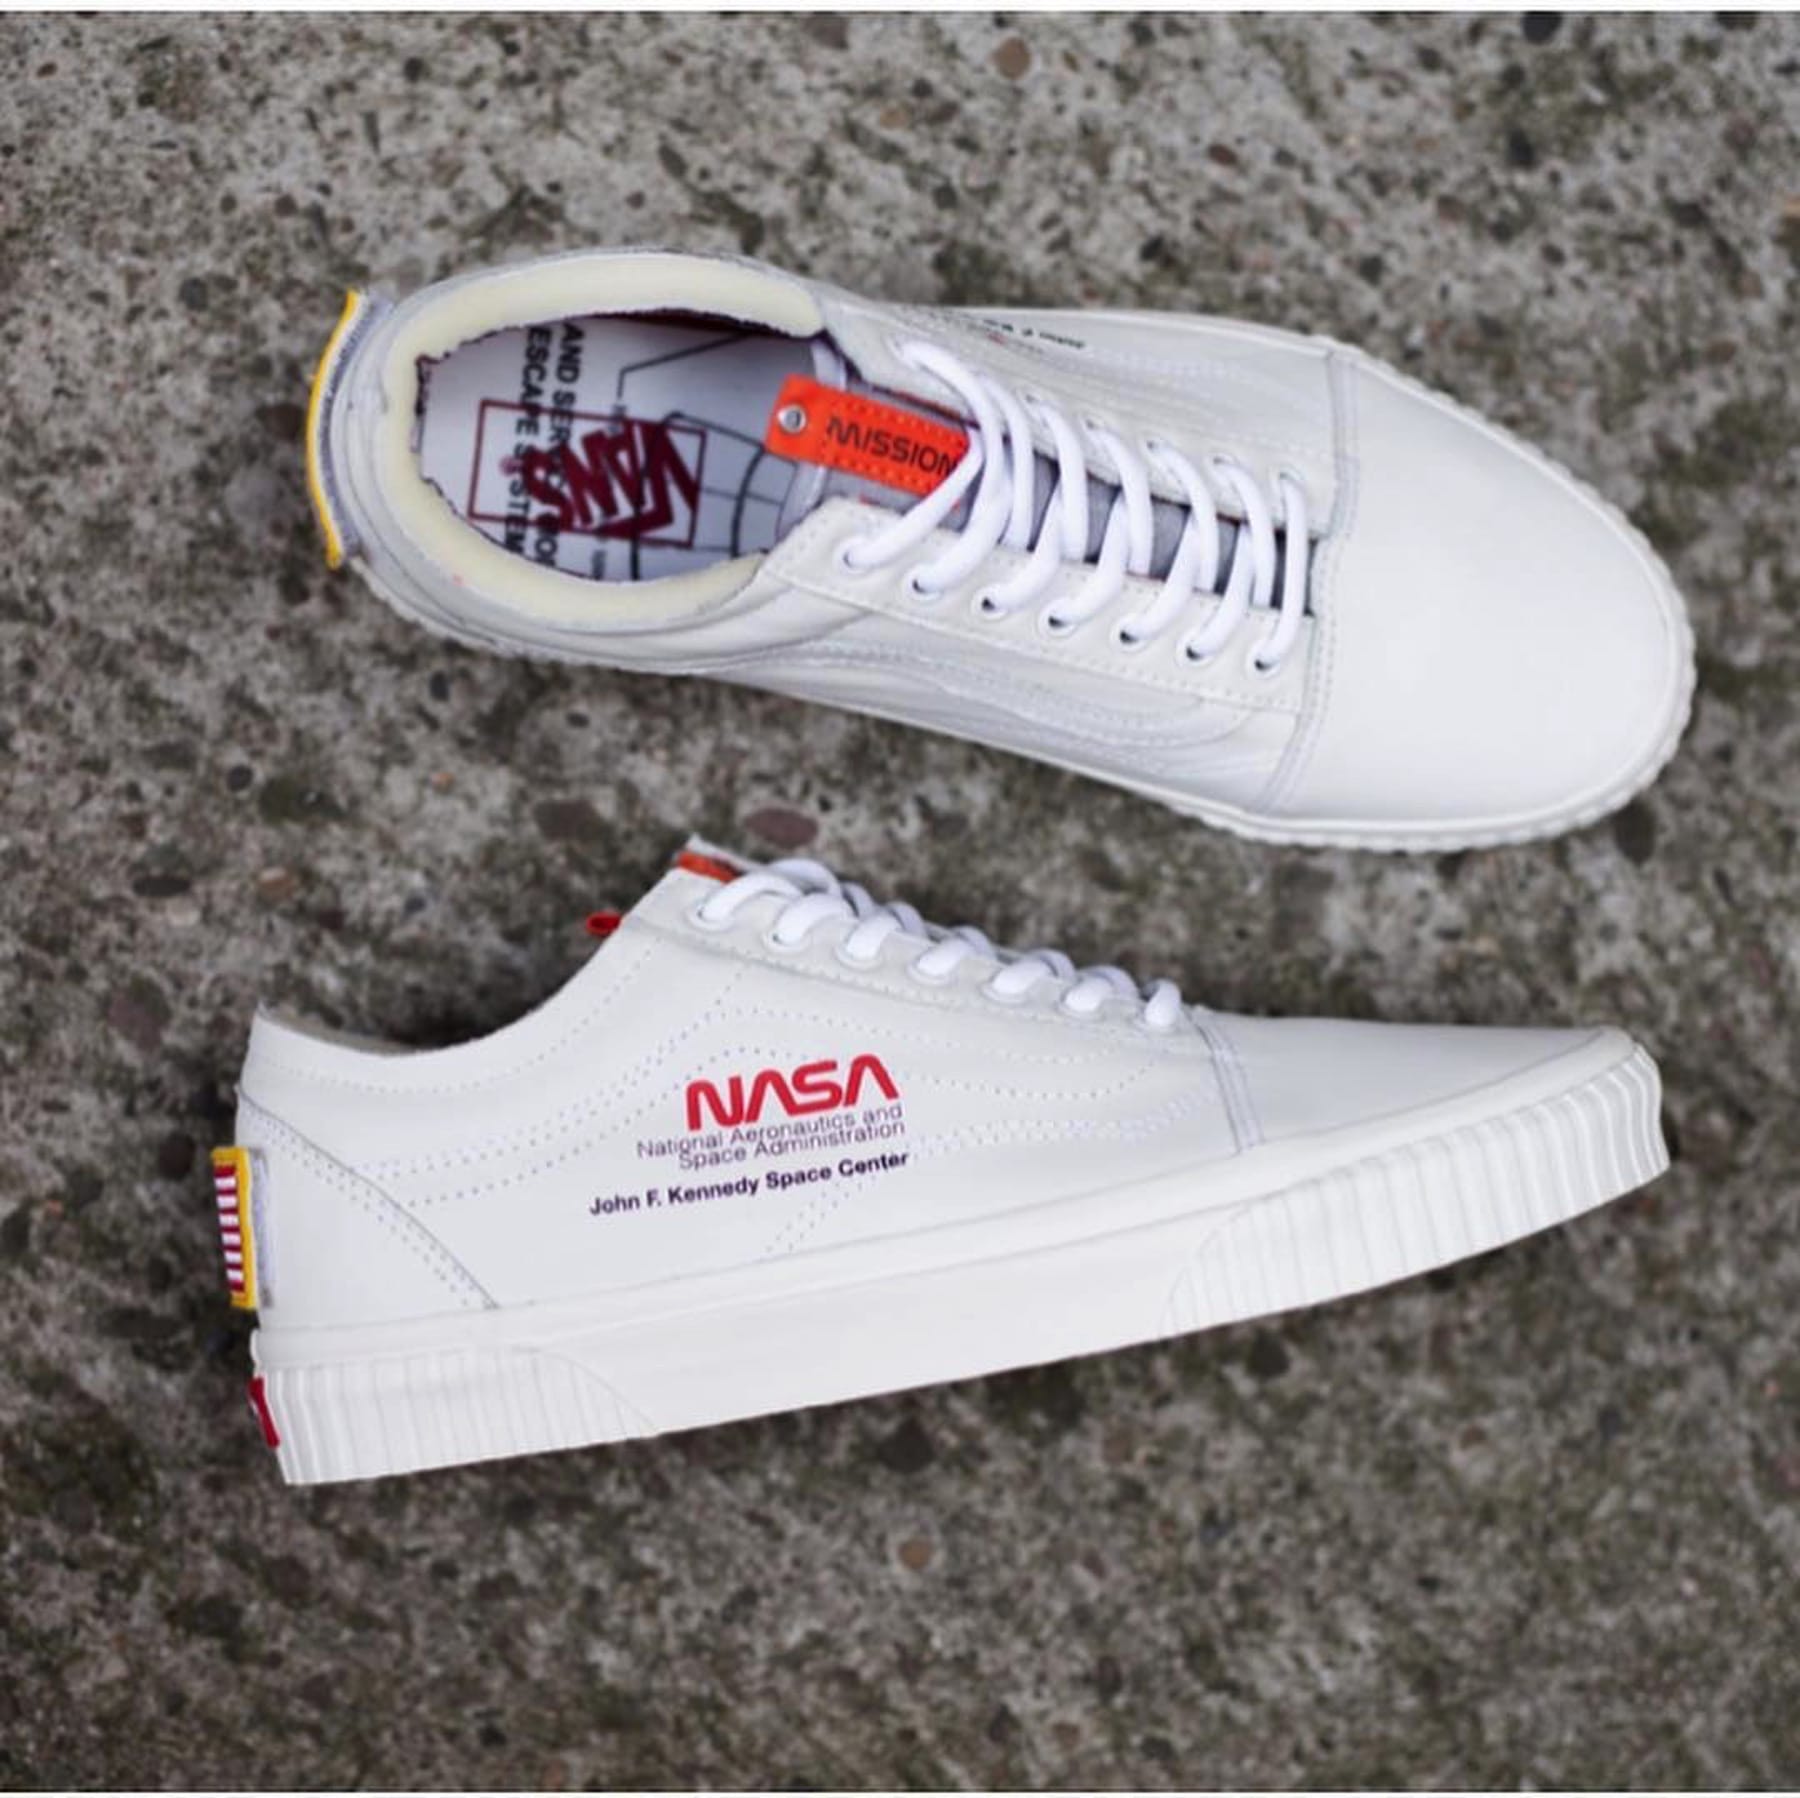 The Exclusive NASA x Vans Collection Is An Epic Launch Not To Be Missed! – SHOUT